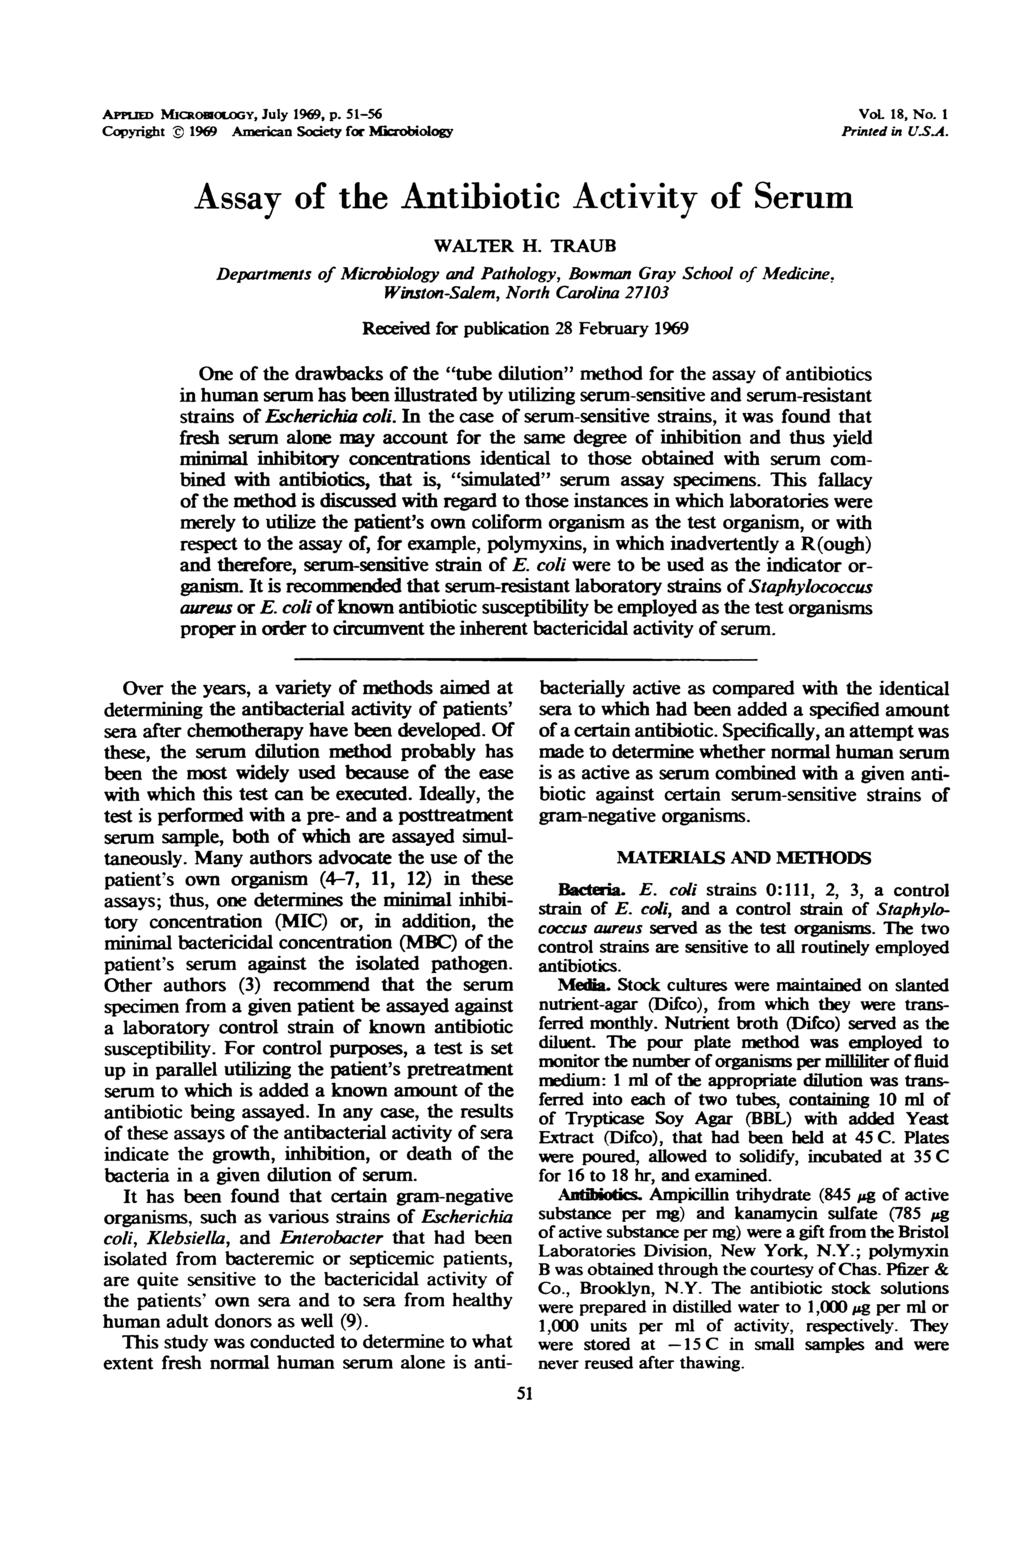 Ampuw MxcRonoLoGY, July 1969, p. 51-56 VoL 18, No. I Copyright ) 1969 American Society for Micobiology Printed in U.SA. Assay of the Antibiotic Activity of Serum WALTER H.